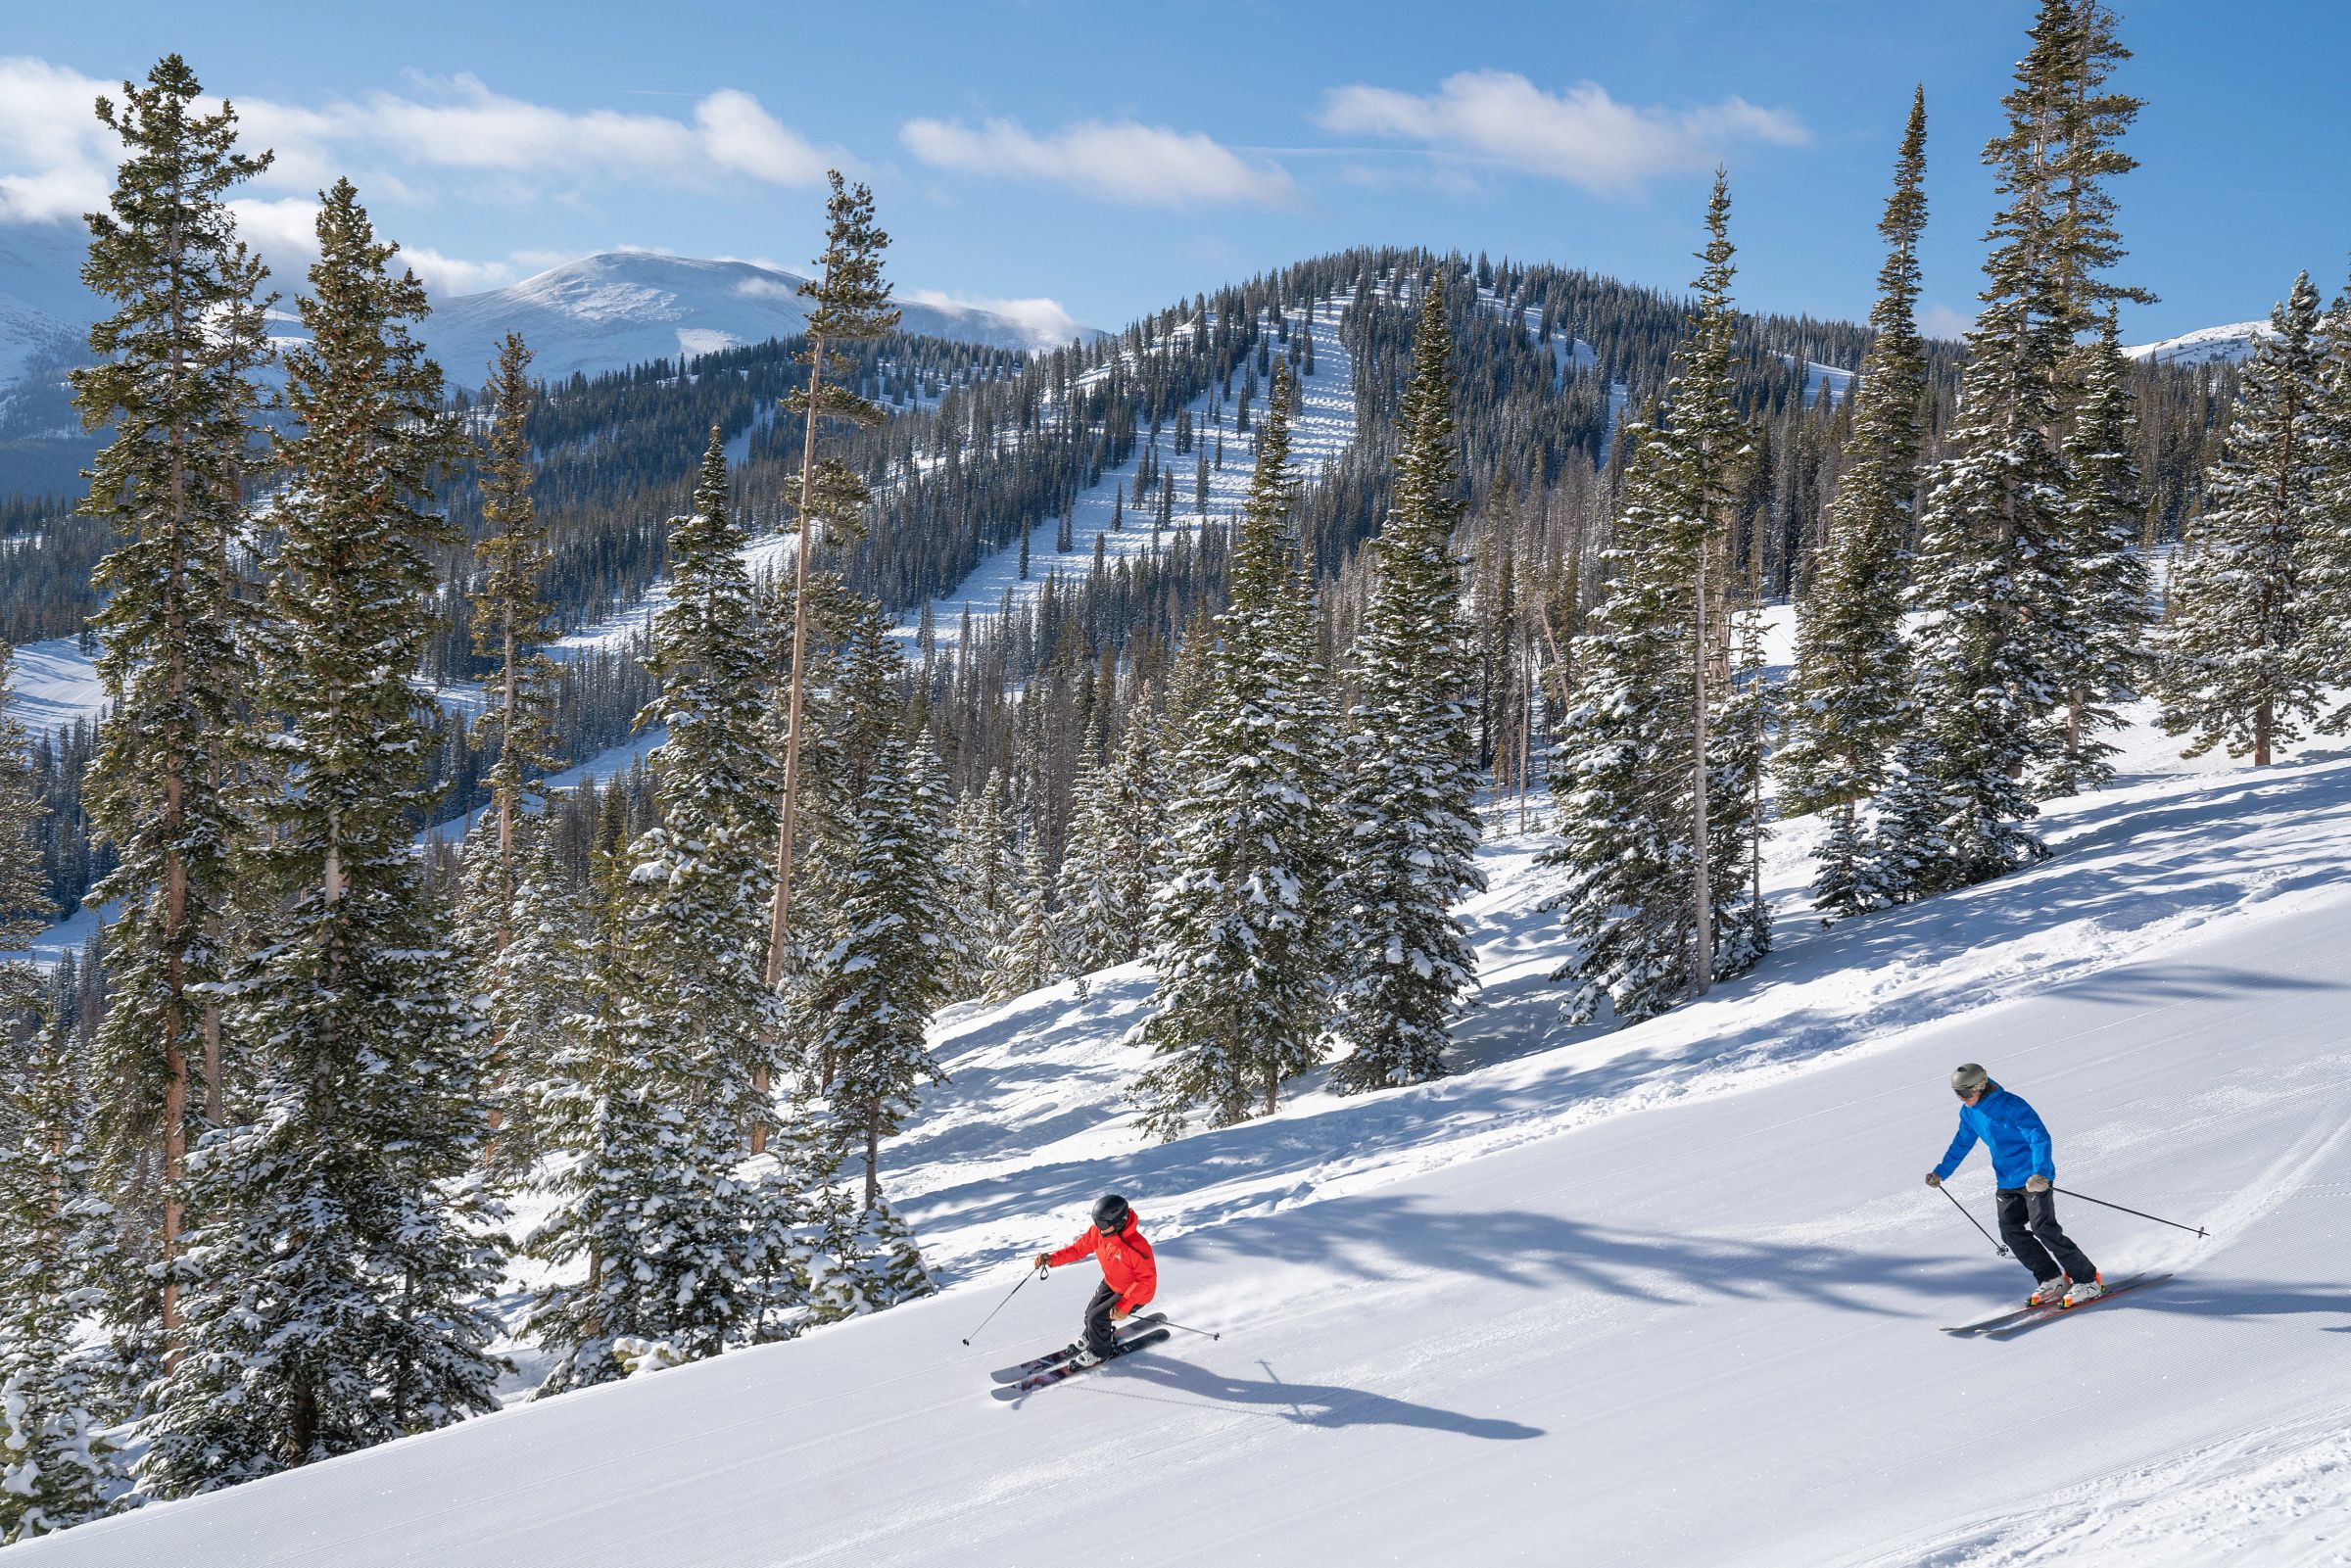 Two skiers at Winter Park Resort